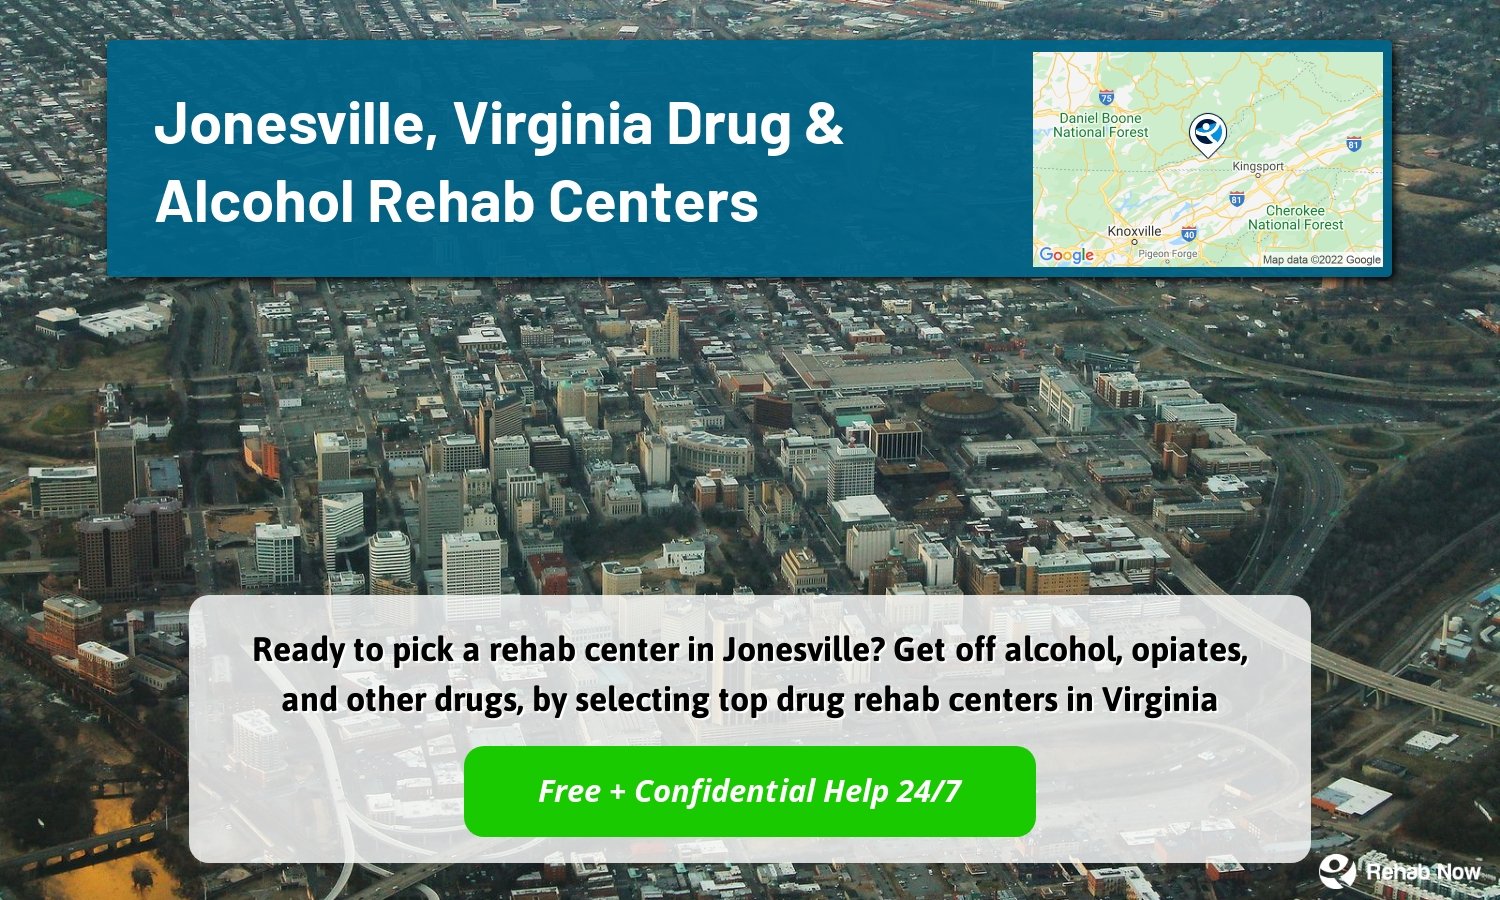 Ready to pick a rehab center in Jonesville? Get off alcohol, opiates, and other drugs, by selecting top drug rehab centers in Virginia